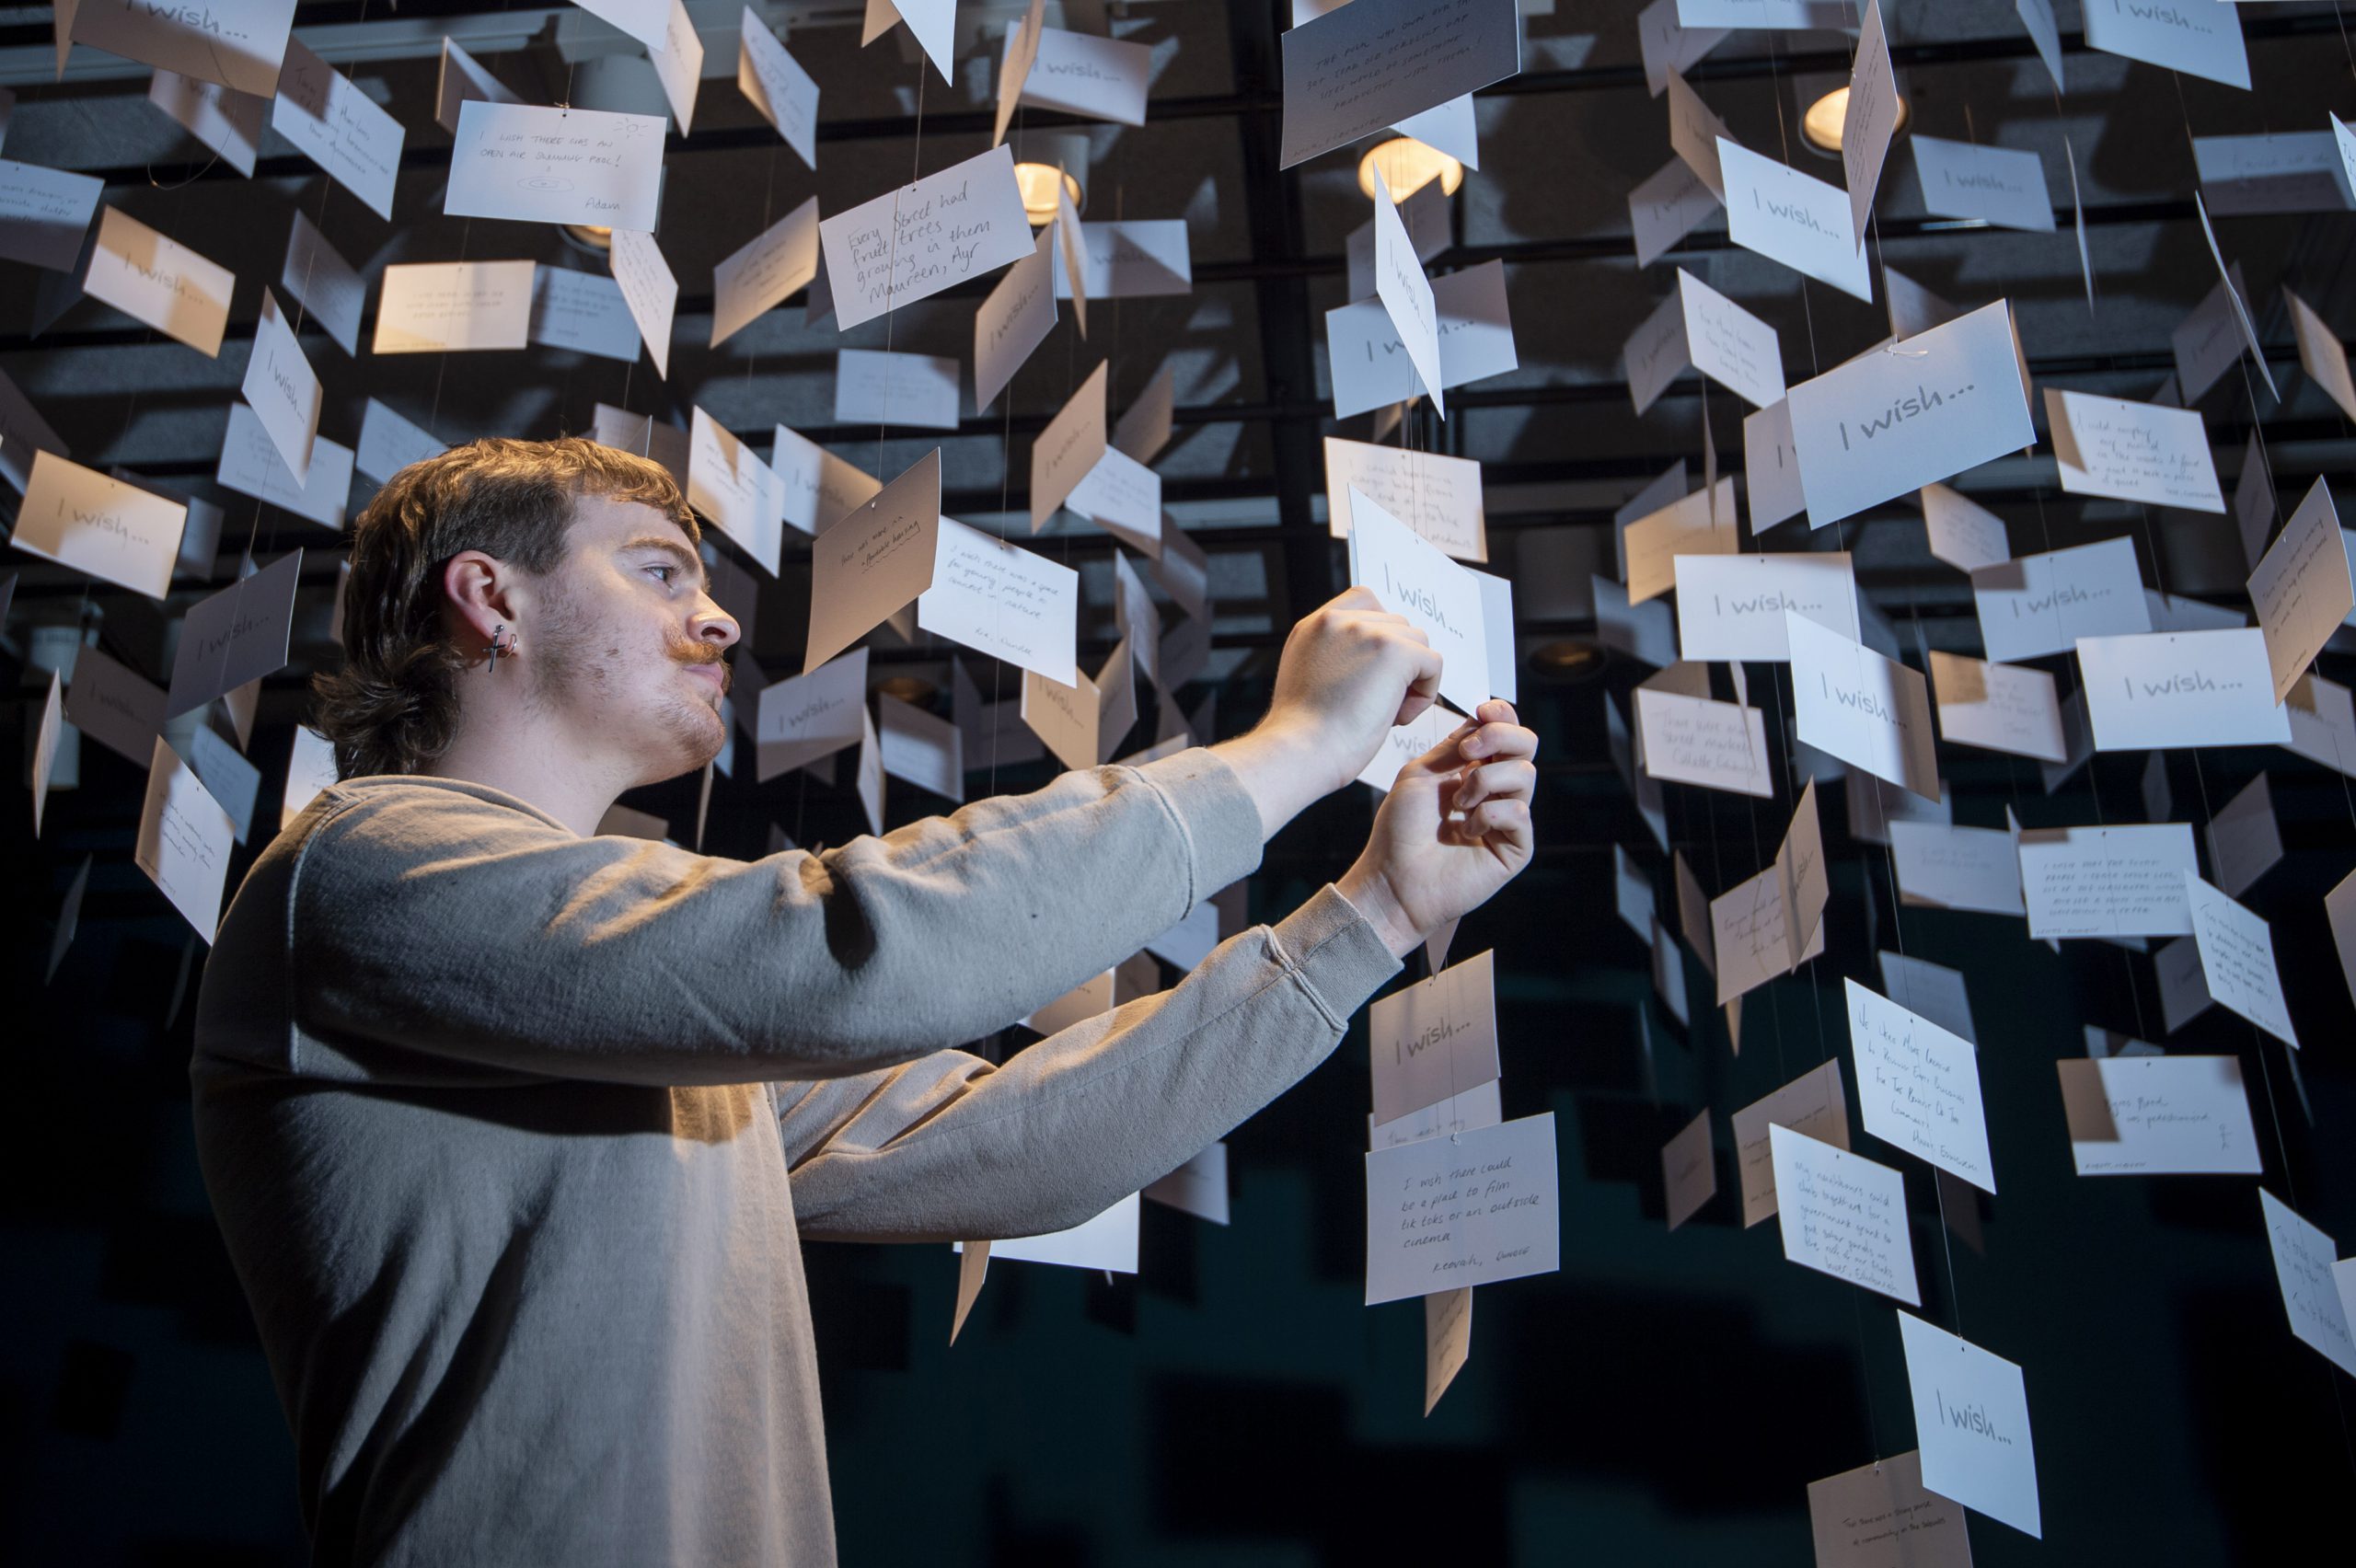 A man holds a post card standing in a "cloud" of white cards suspended from strings in a dark room.